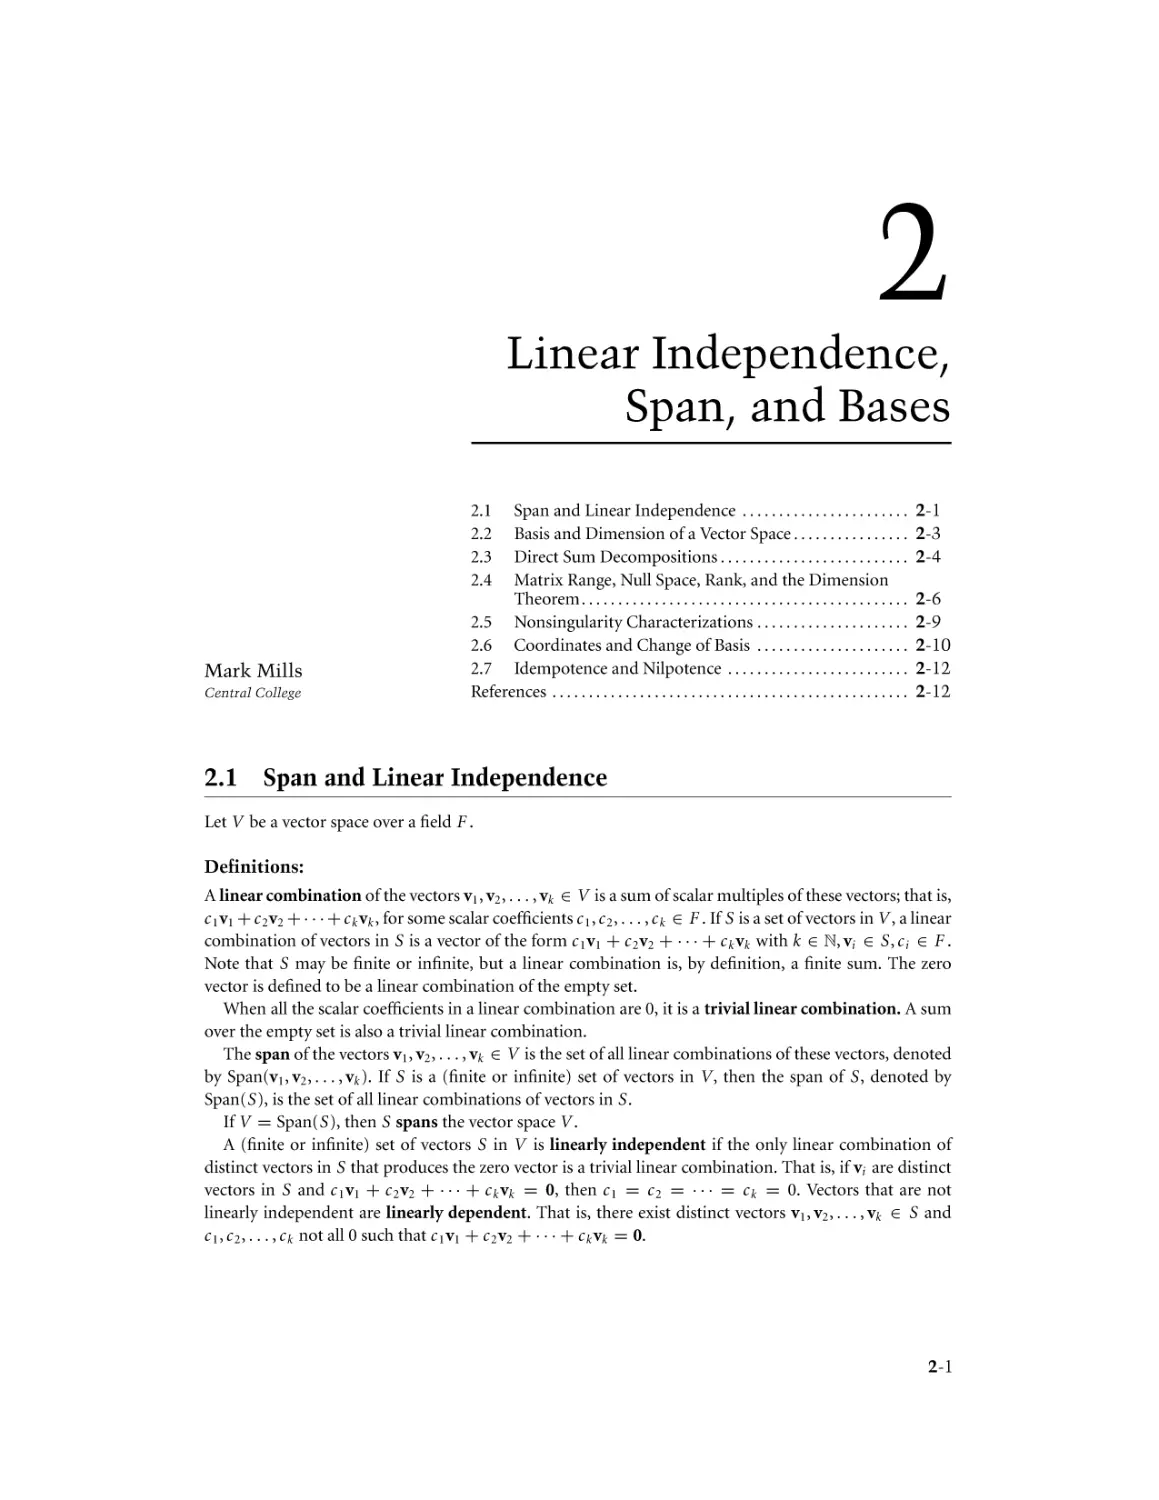 Chapter 2. Linear Independence, Span, and Bases